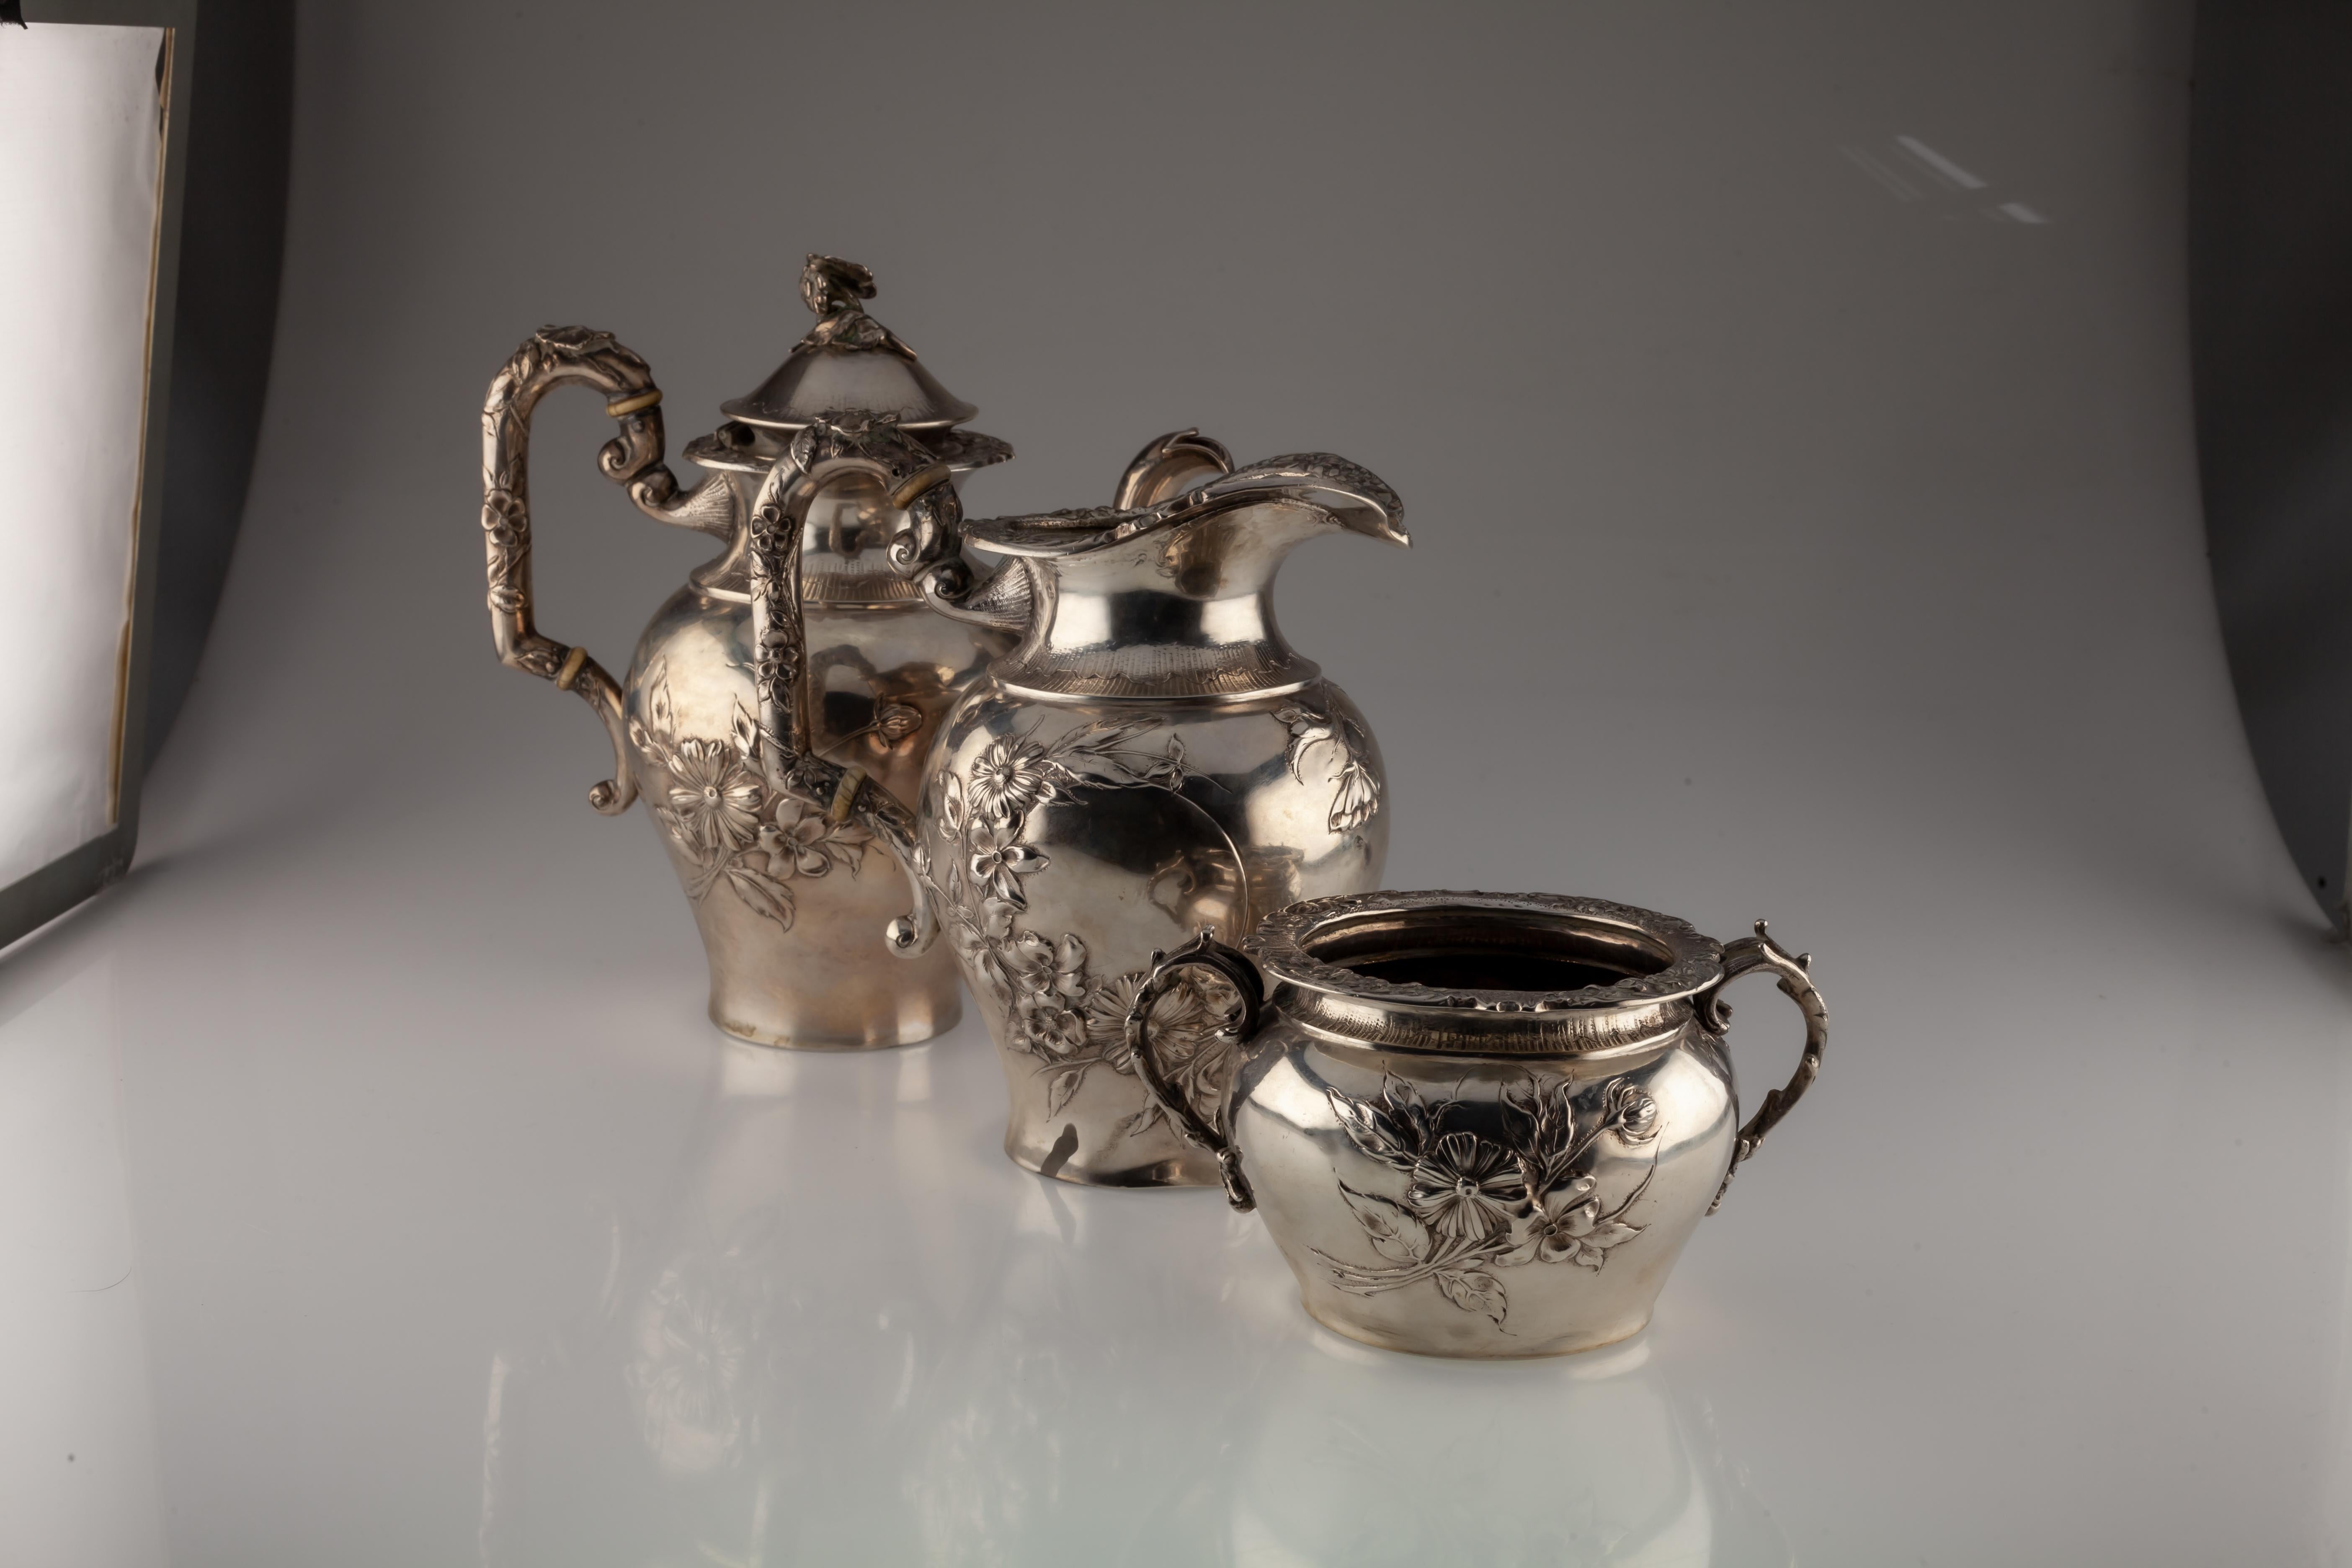 
Ornate Sterling Silver British Tea/Coffee Set 1930s Hand-Chased

Gorgeous Lot of 3 Coffee Set Pieces
London Assay Mark, Date Mark Indicates 1937
Includes Coffee Pot, Creamer/Pitcher, and Sugar
Coffee Pot
Appx 7 3/4